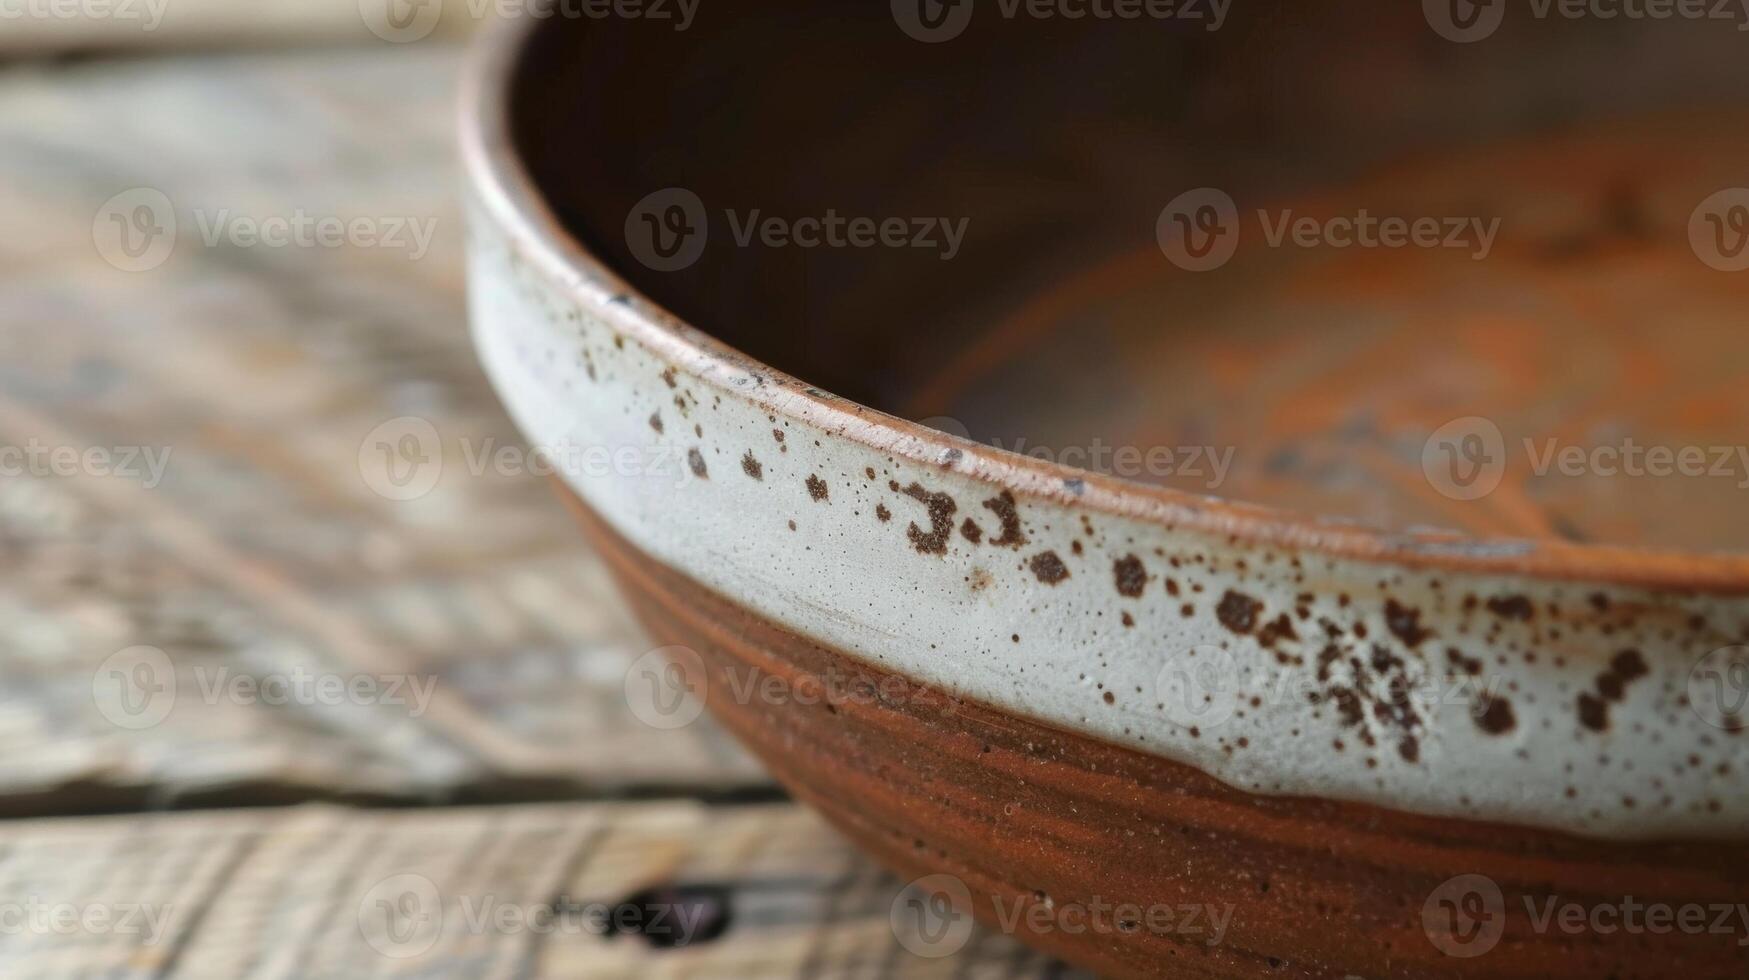 A closeup of the bottom of a highfire clay baking dish showcasing the artists signature and the date it was made adding a personal touch to the functional piece. photo